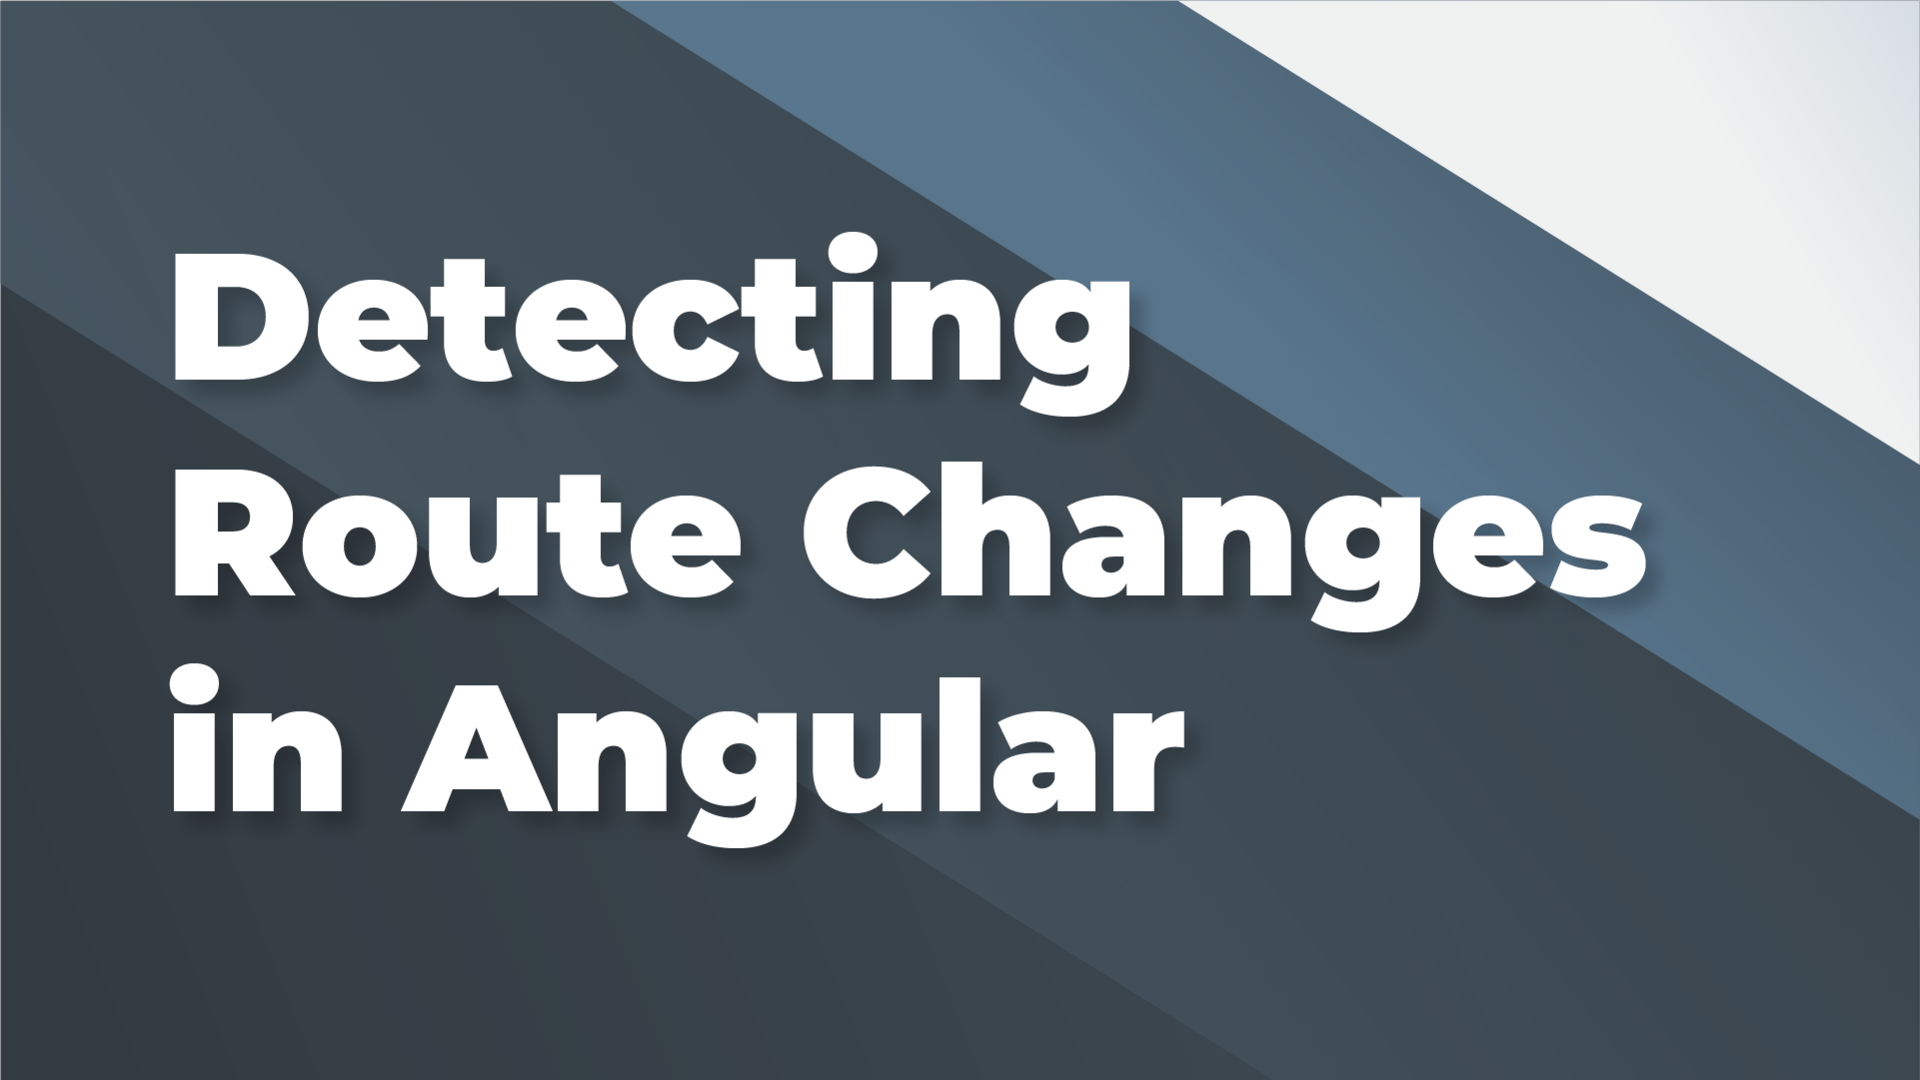 Detecting Route Changes Angular